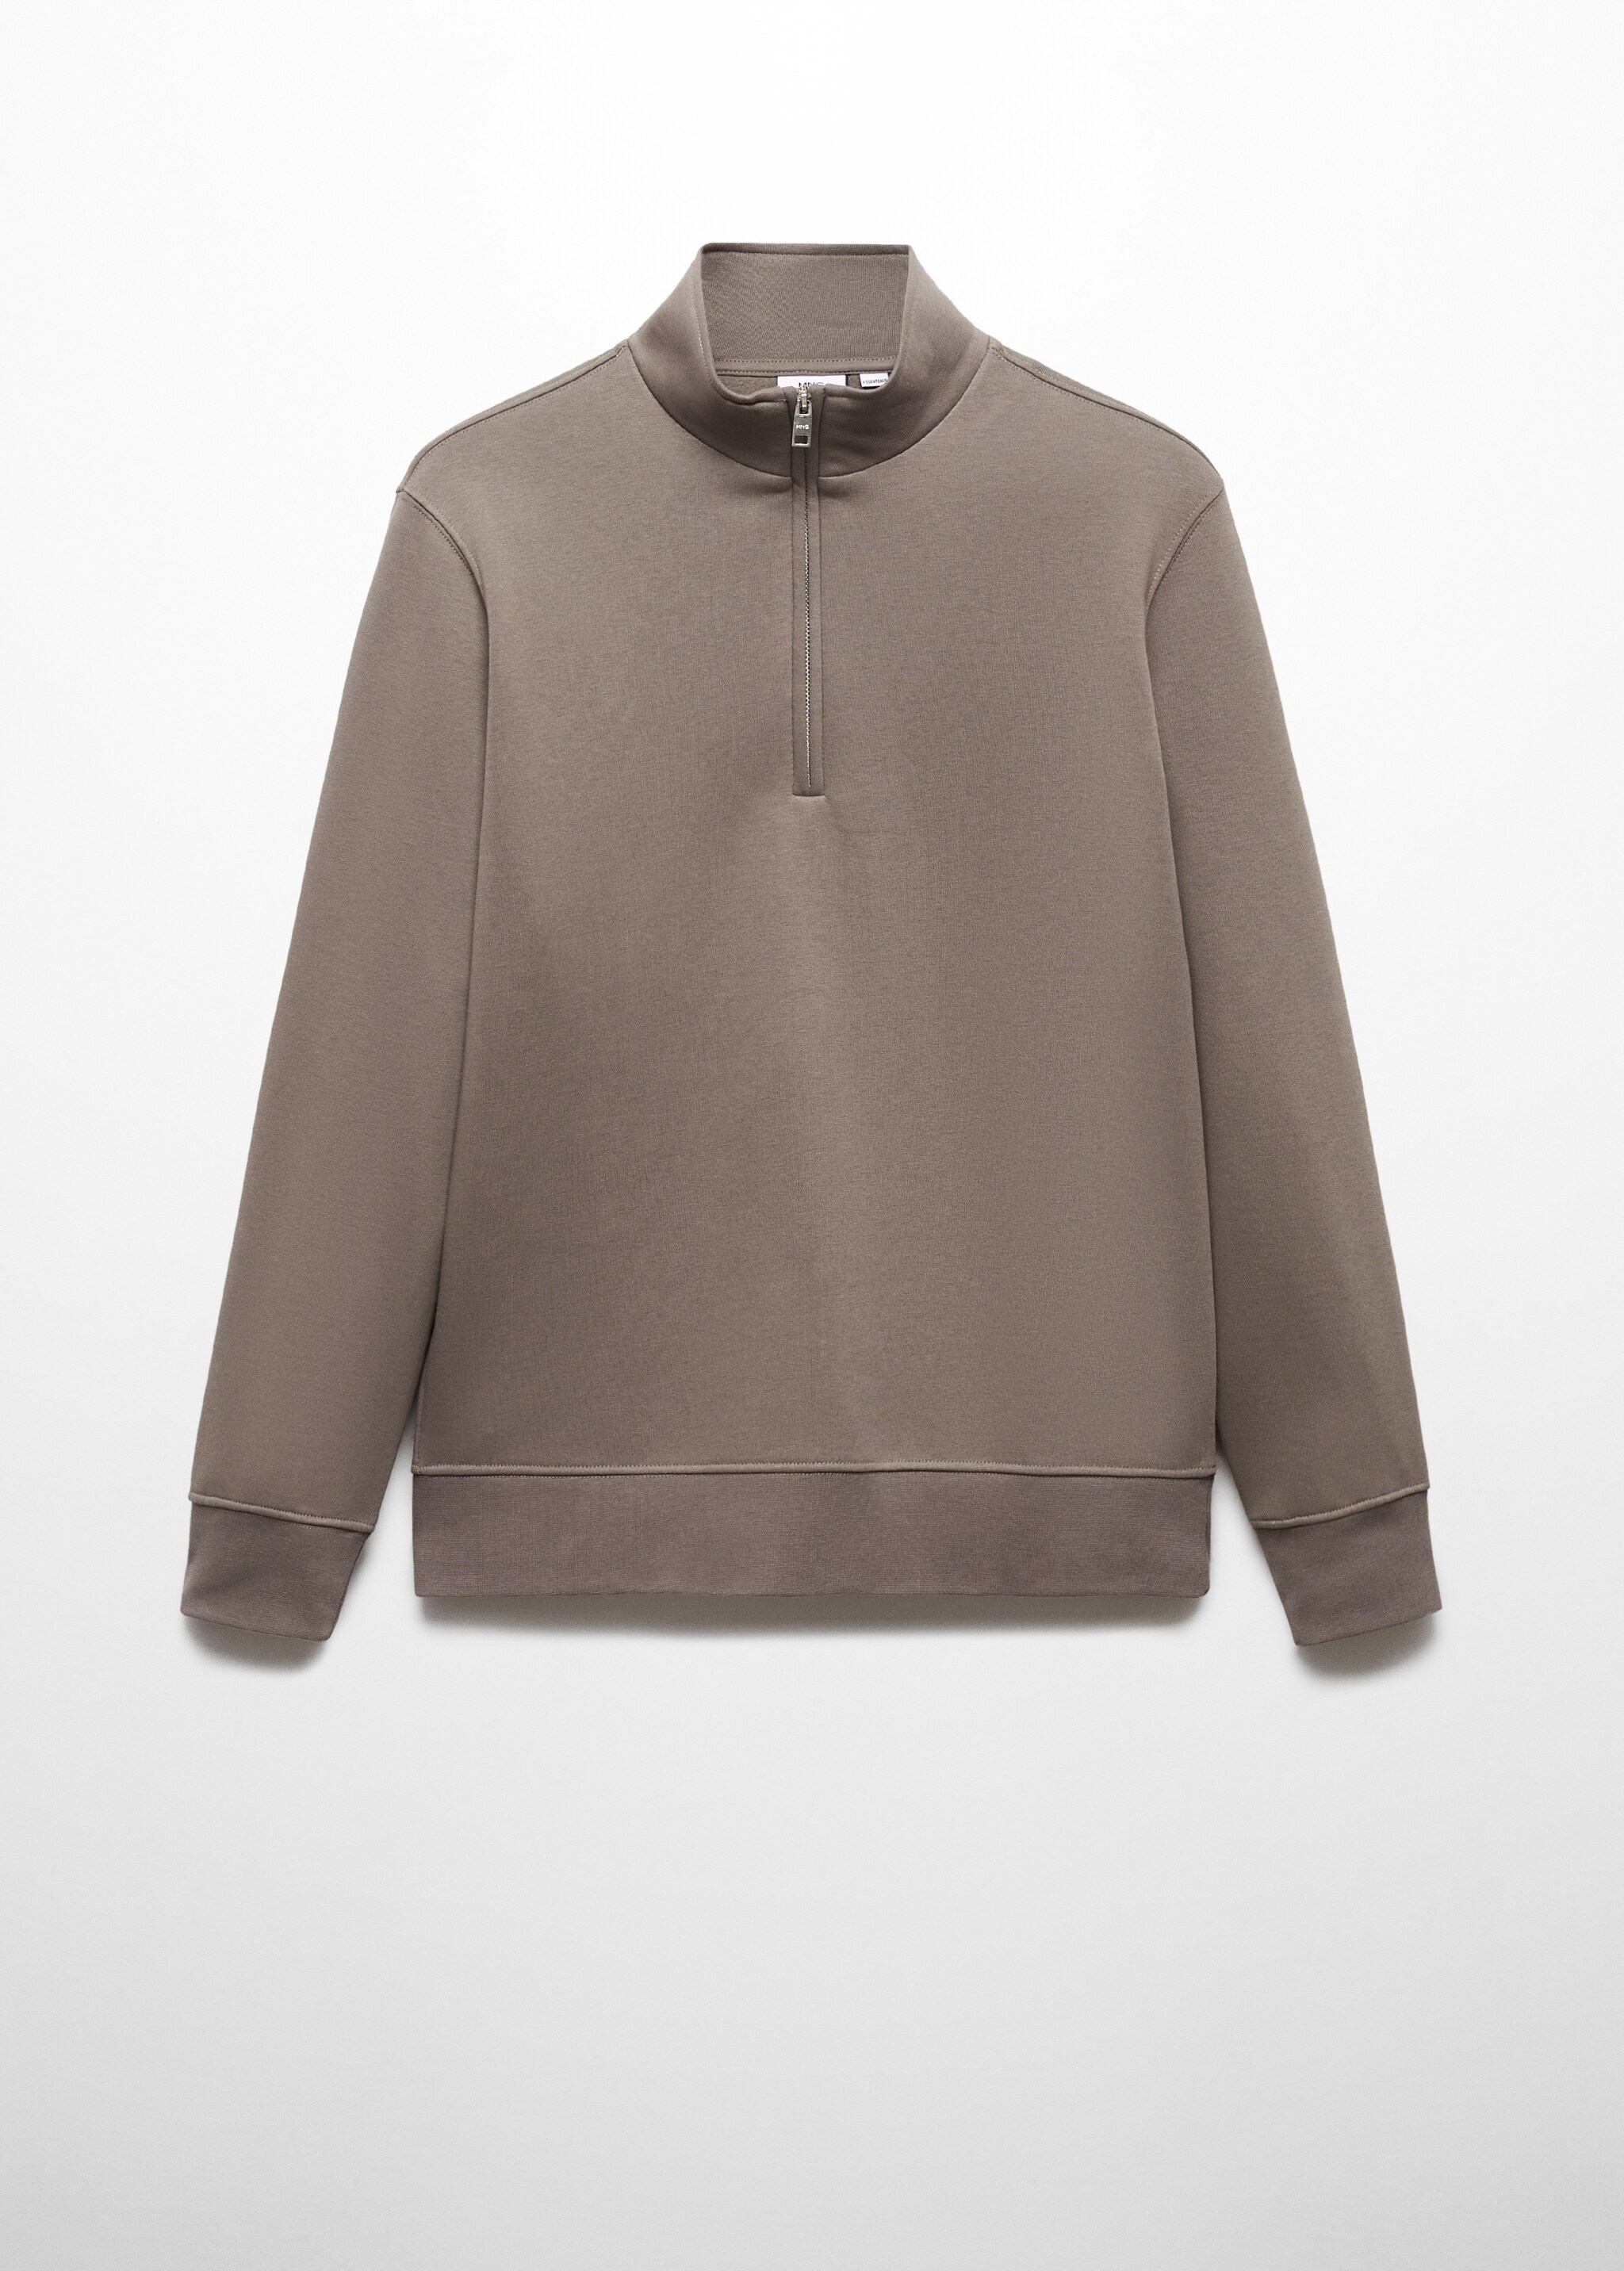 Cotton sweatshirt with zip neck - Article without model